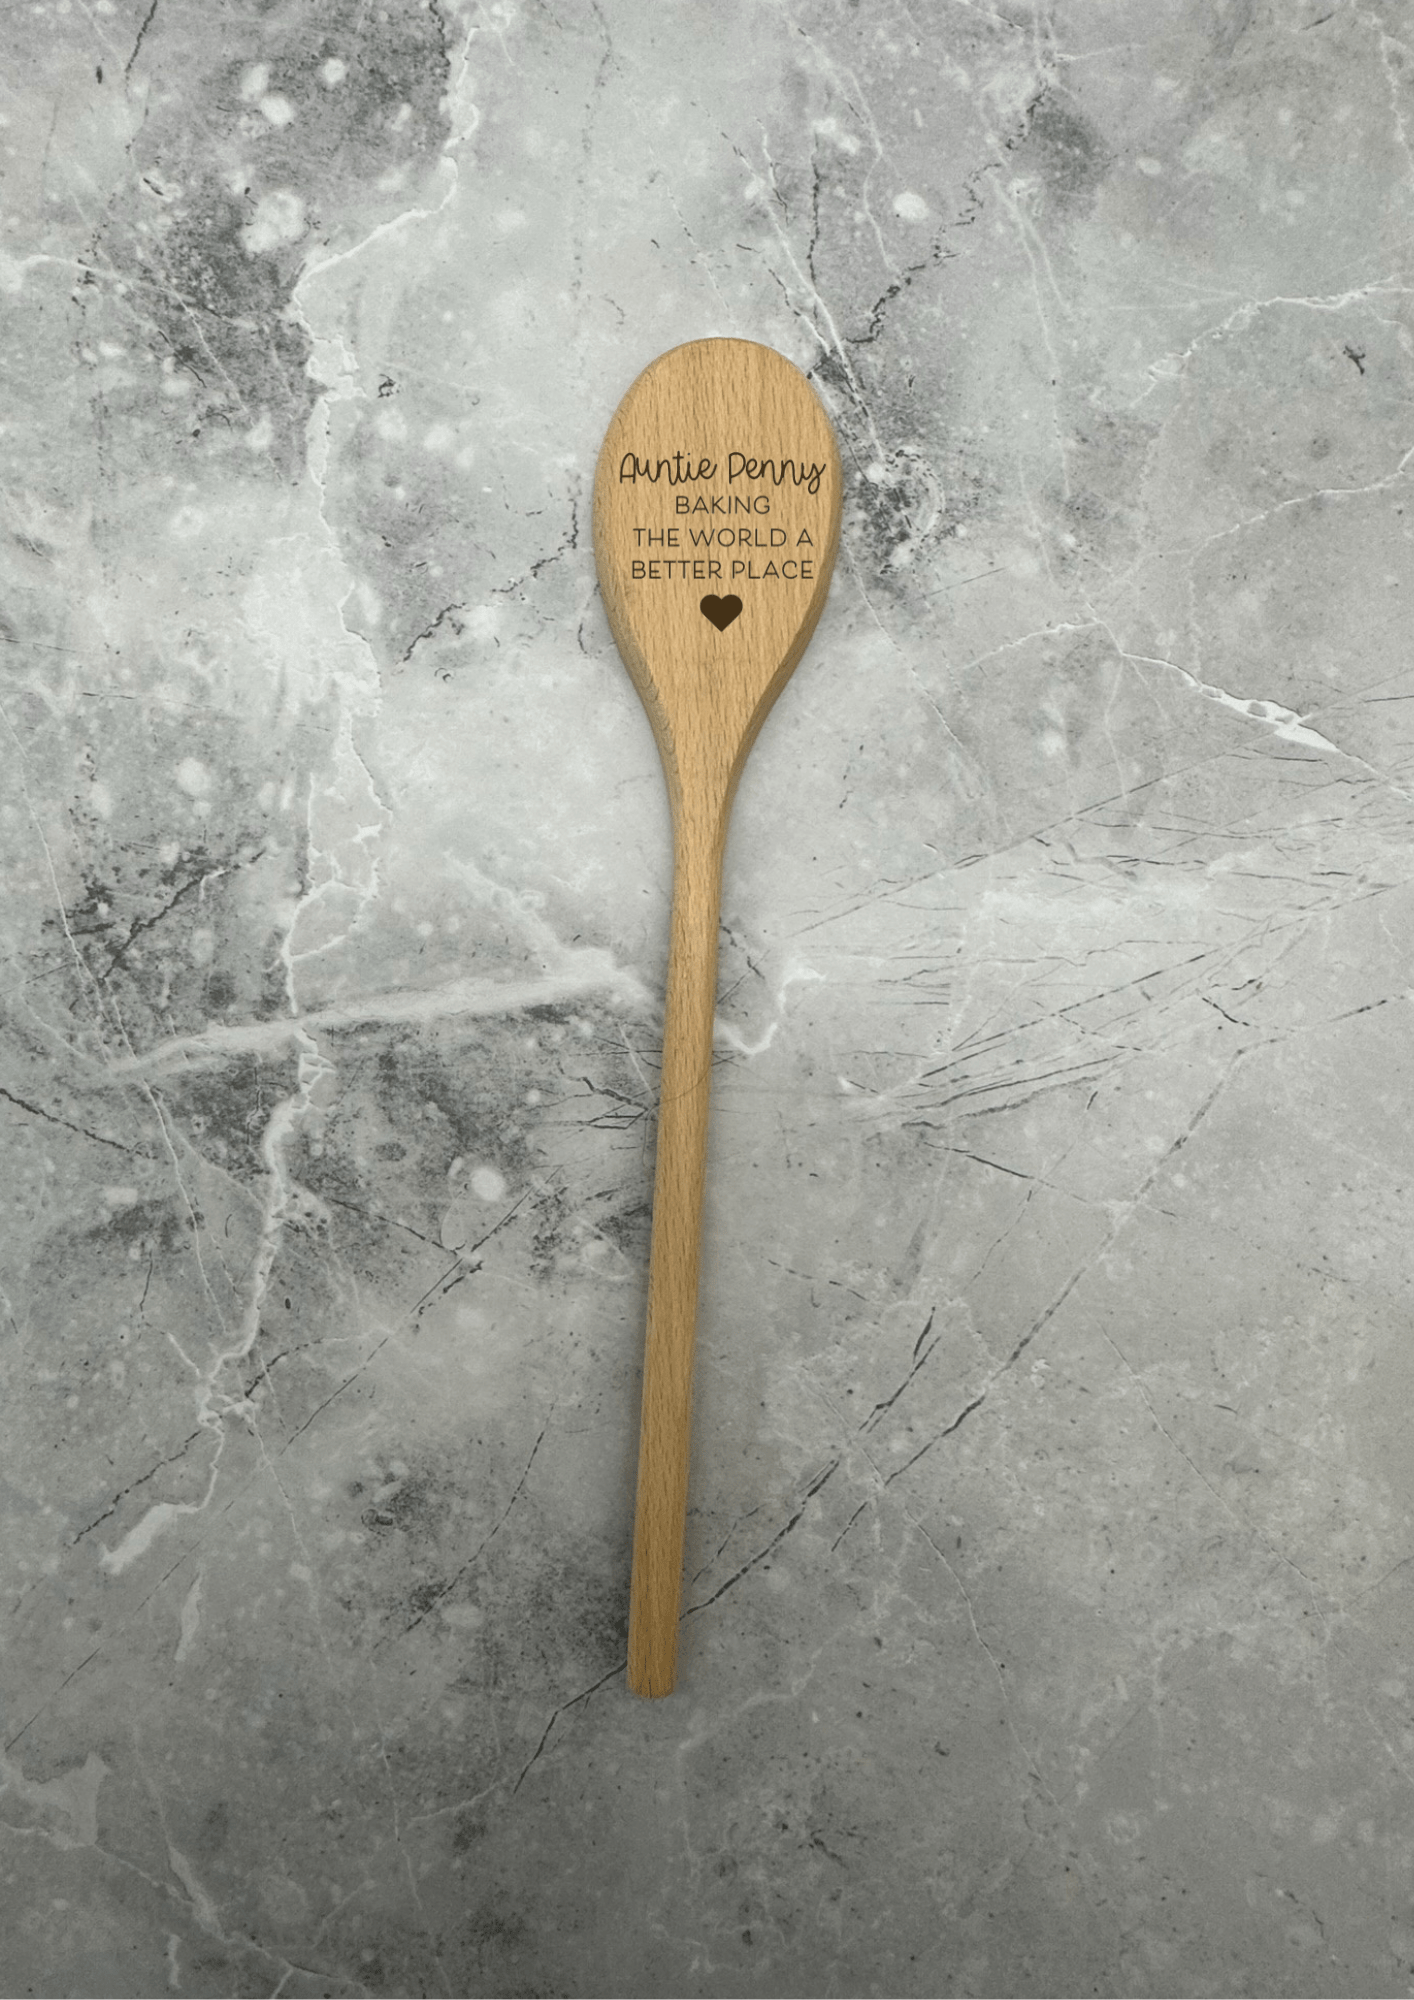 Lua Nova Wooden Spoon Personalised Wooden Spoon - Baking the World a Better Place